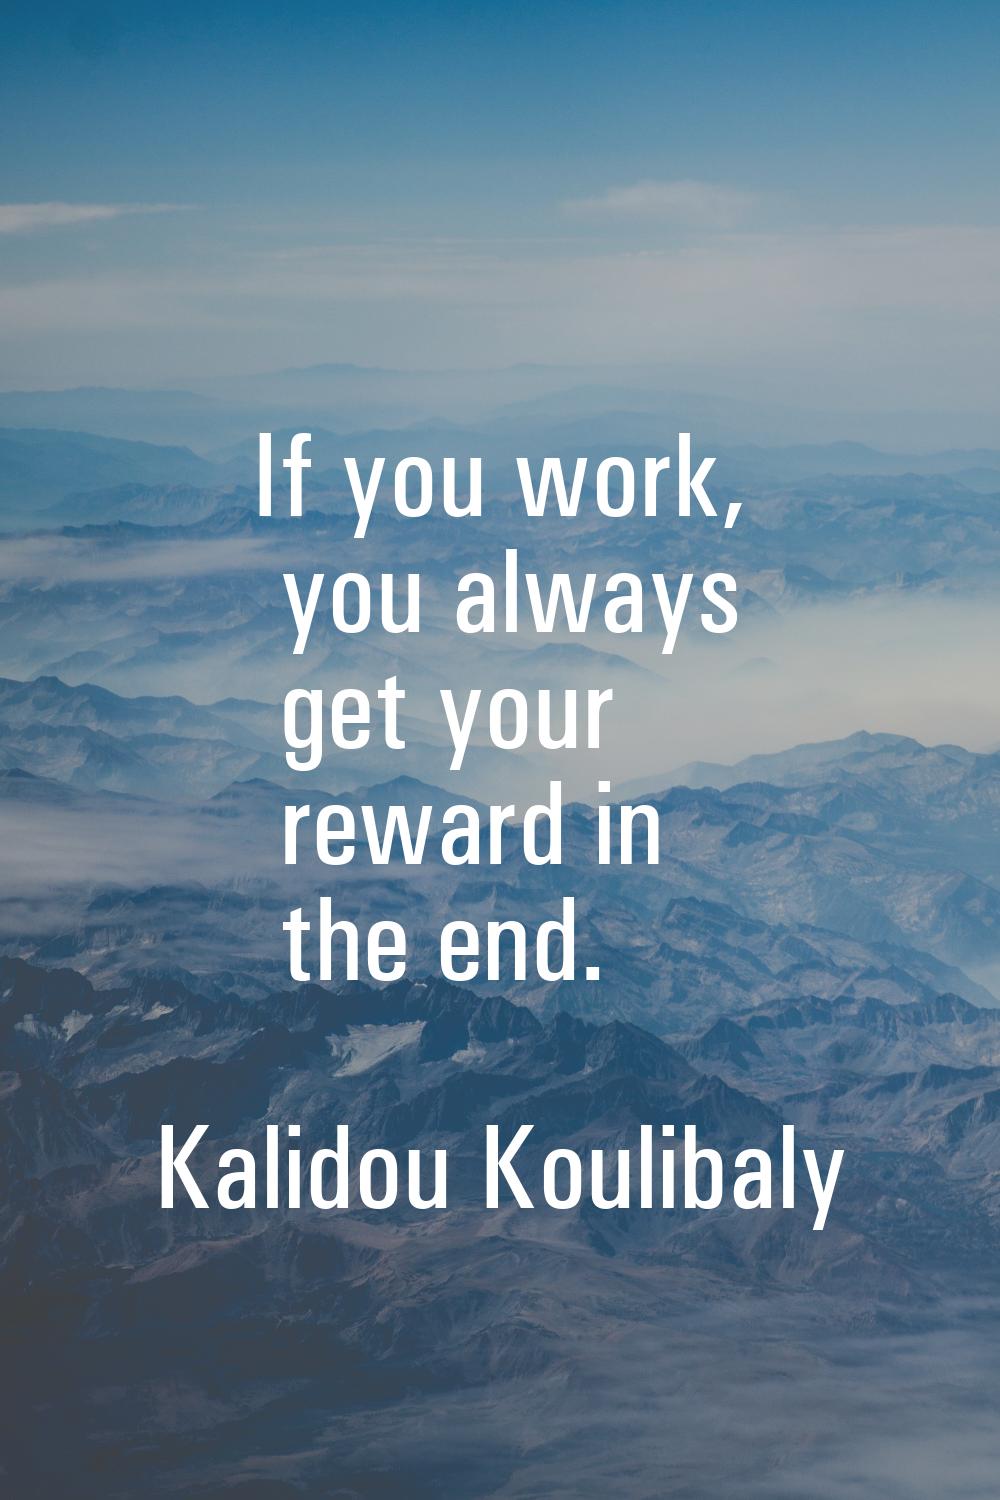 If you work, you always get your reward in the end.